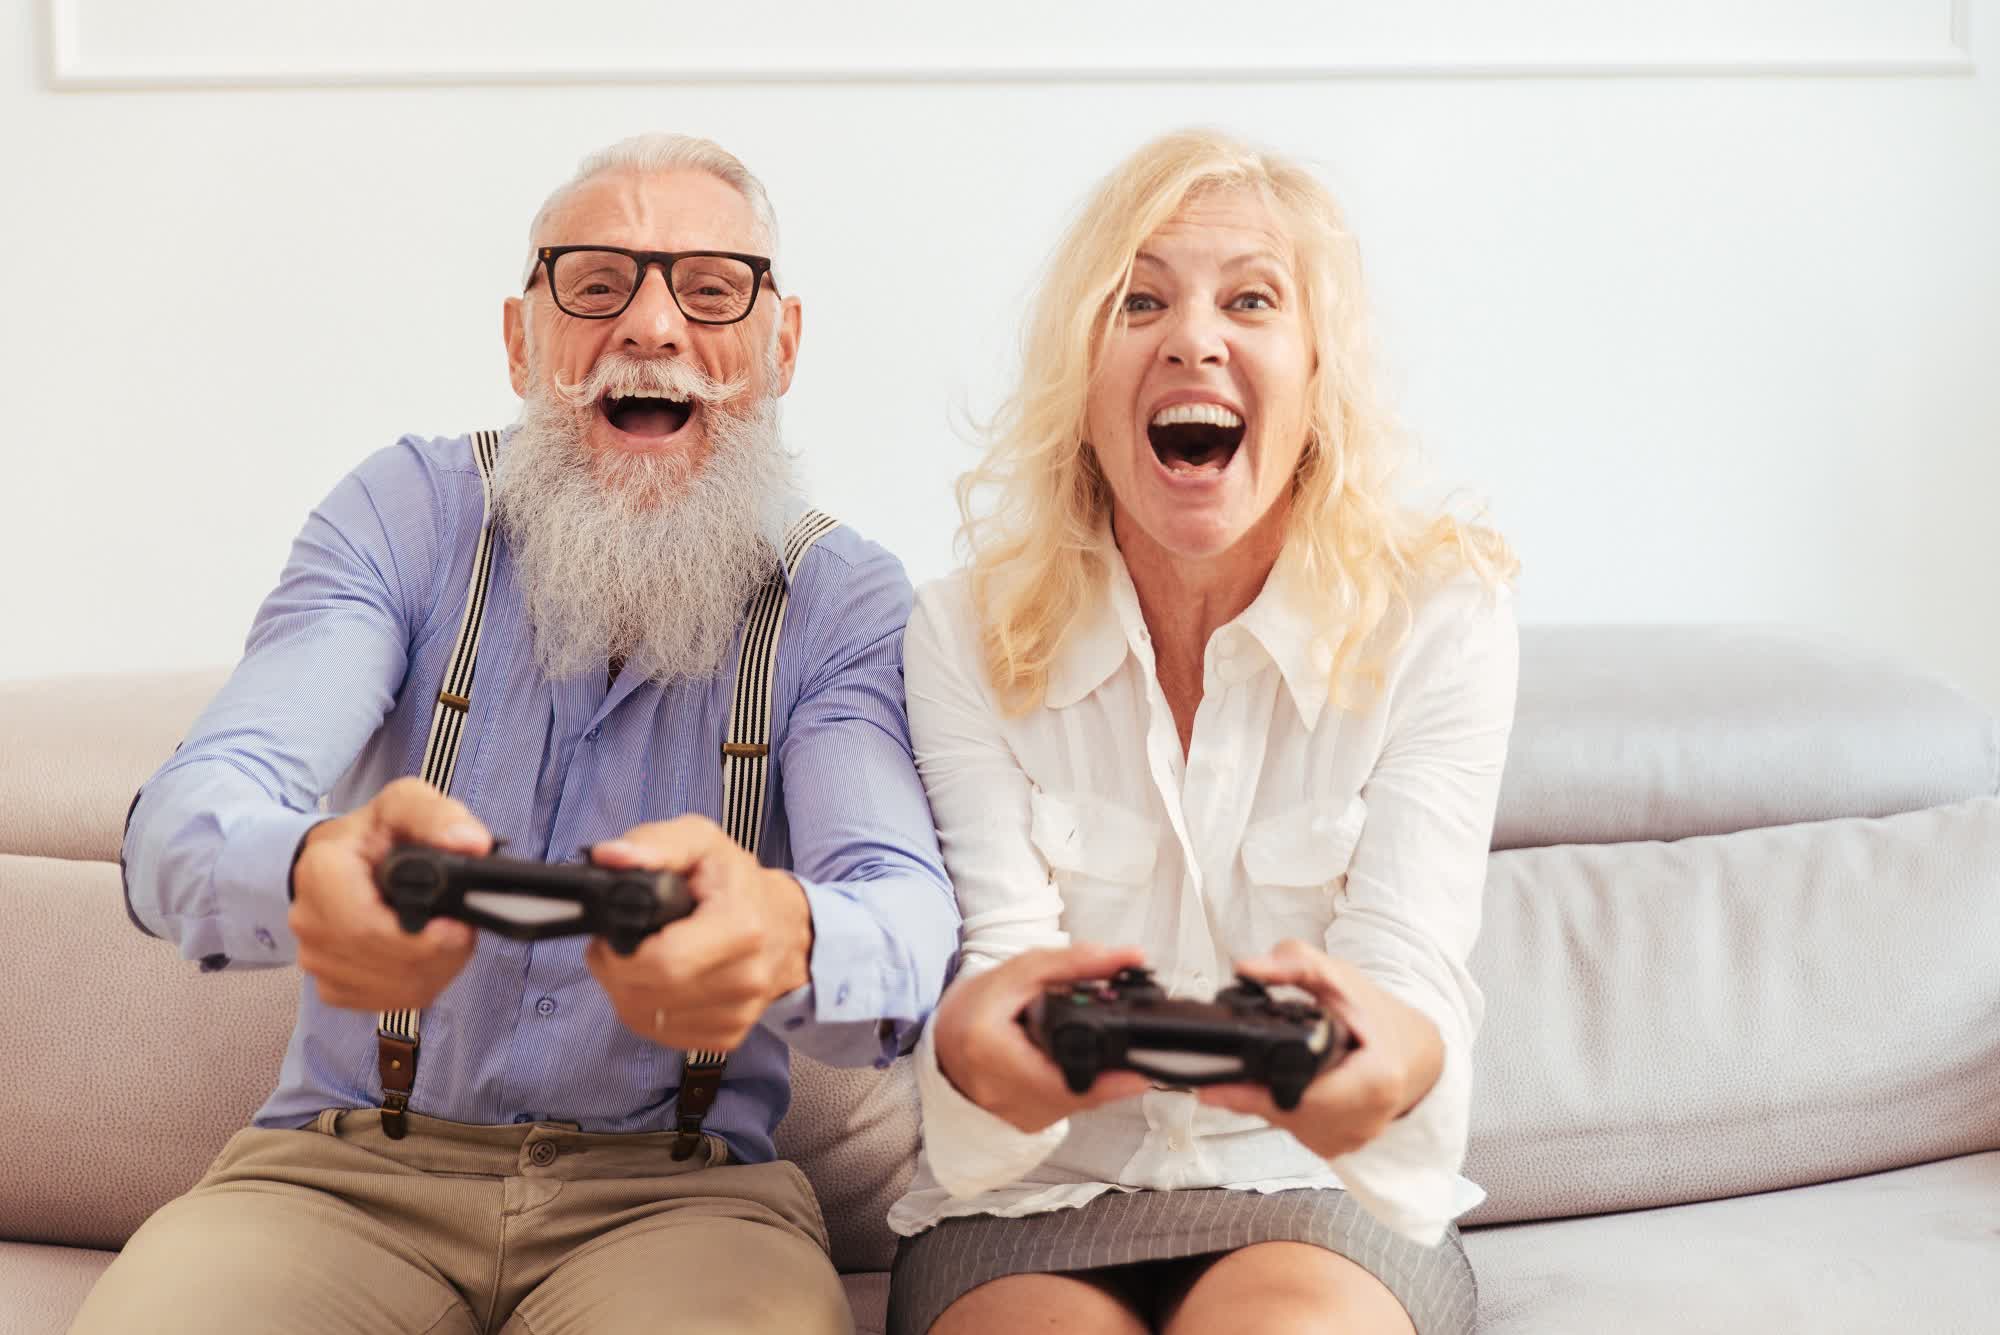 More Gen Xers and Baby Boomers are playing games